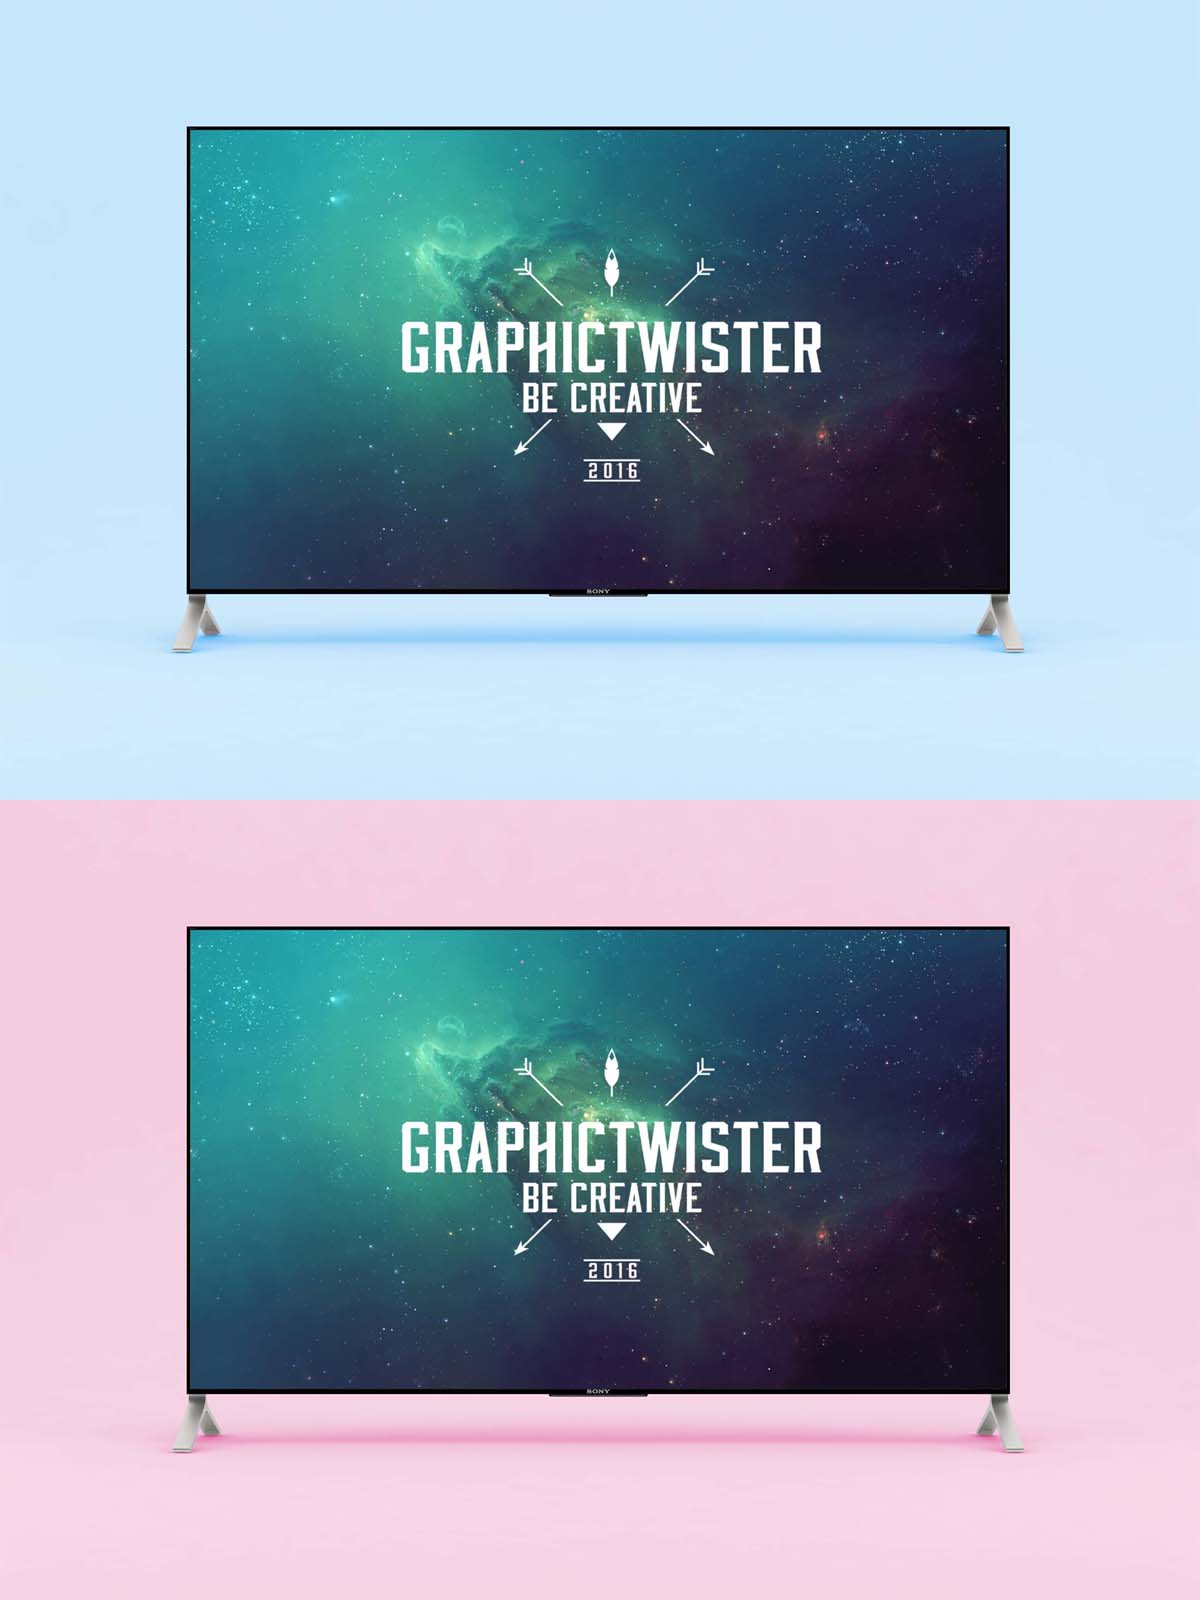 Free Smart TV 4K Mockup (PSD) - Find the Perfect Creative Mockups Freebies to Showcase your ...